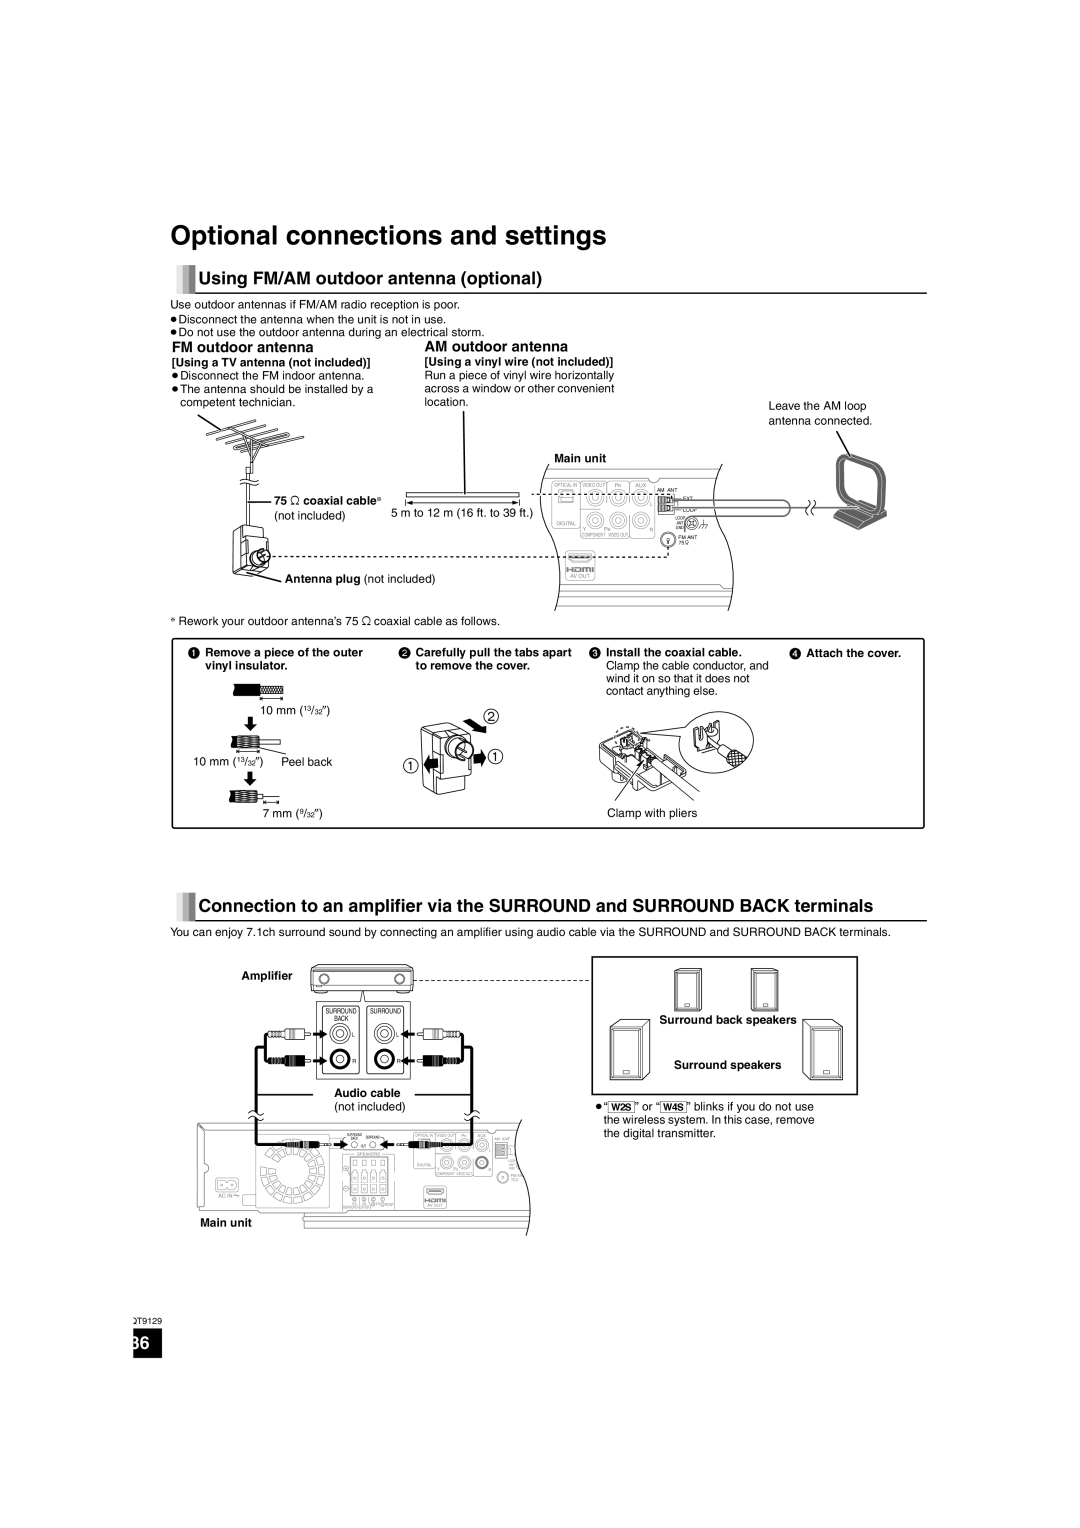 Panasonic SC-BT100 warranty Optional connections and settings, Using FM/AM outdoor antenna optional, FM outdoor antenna 